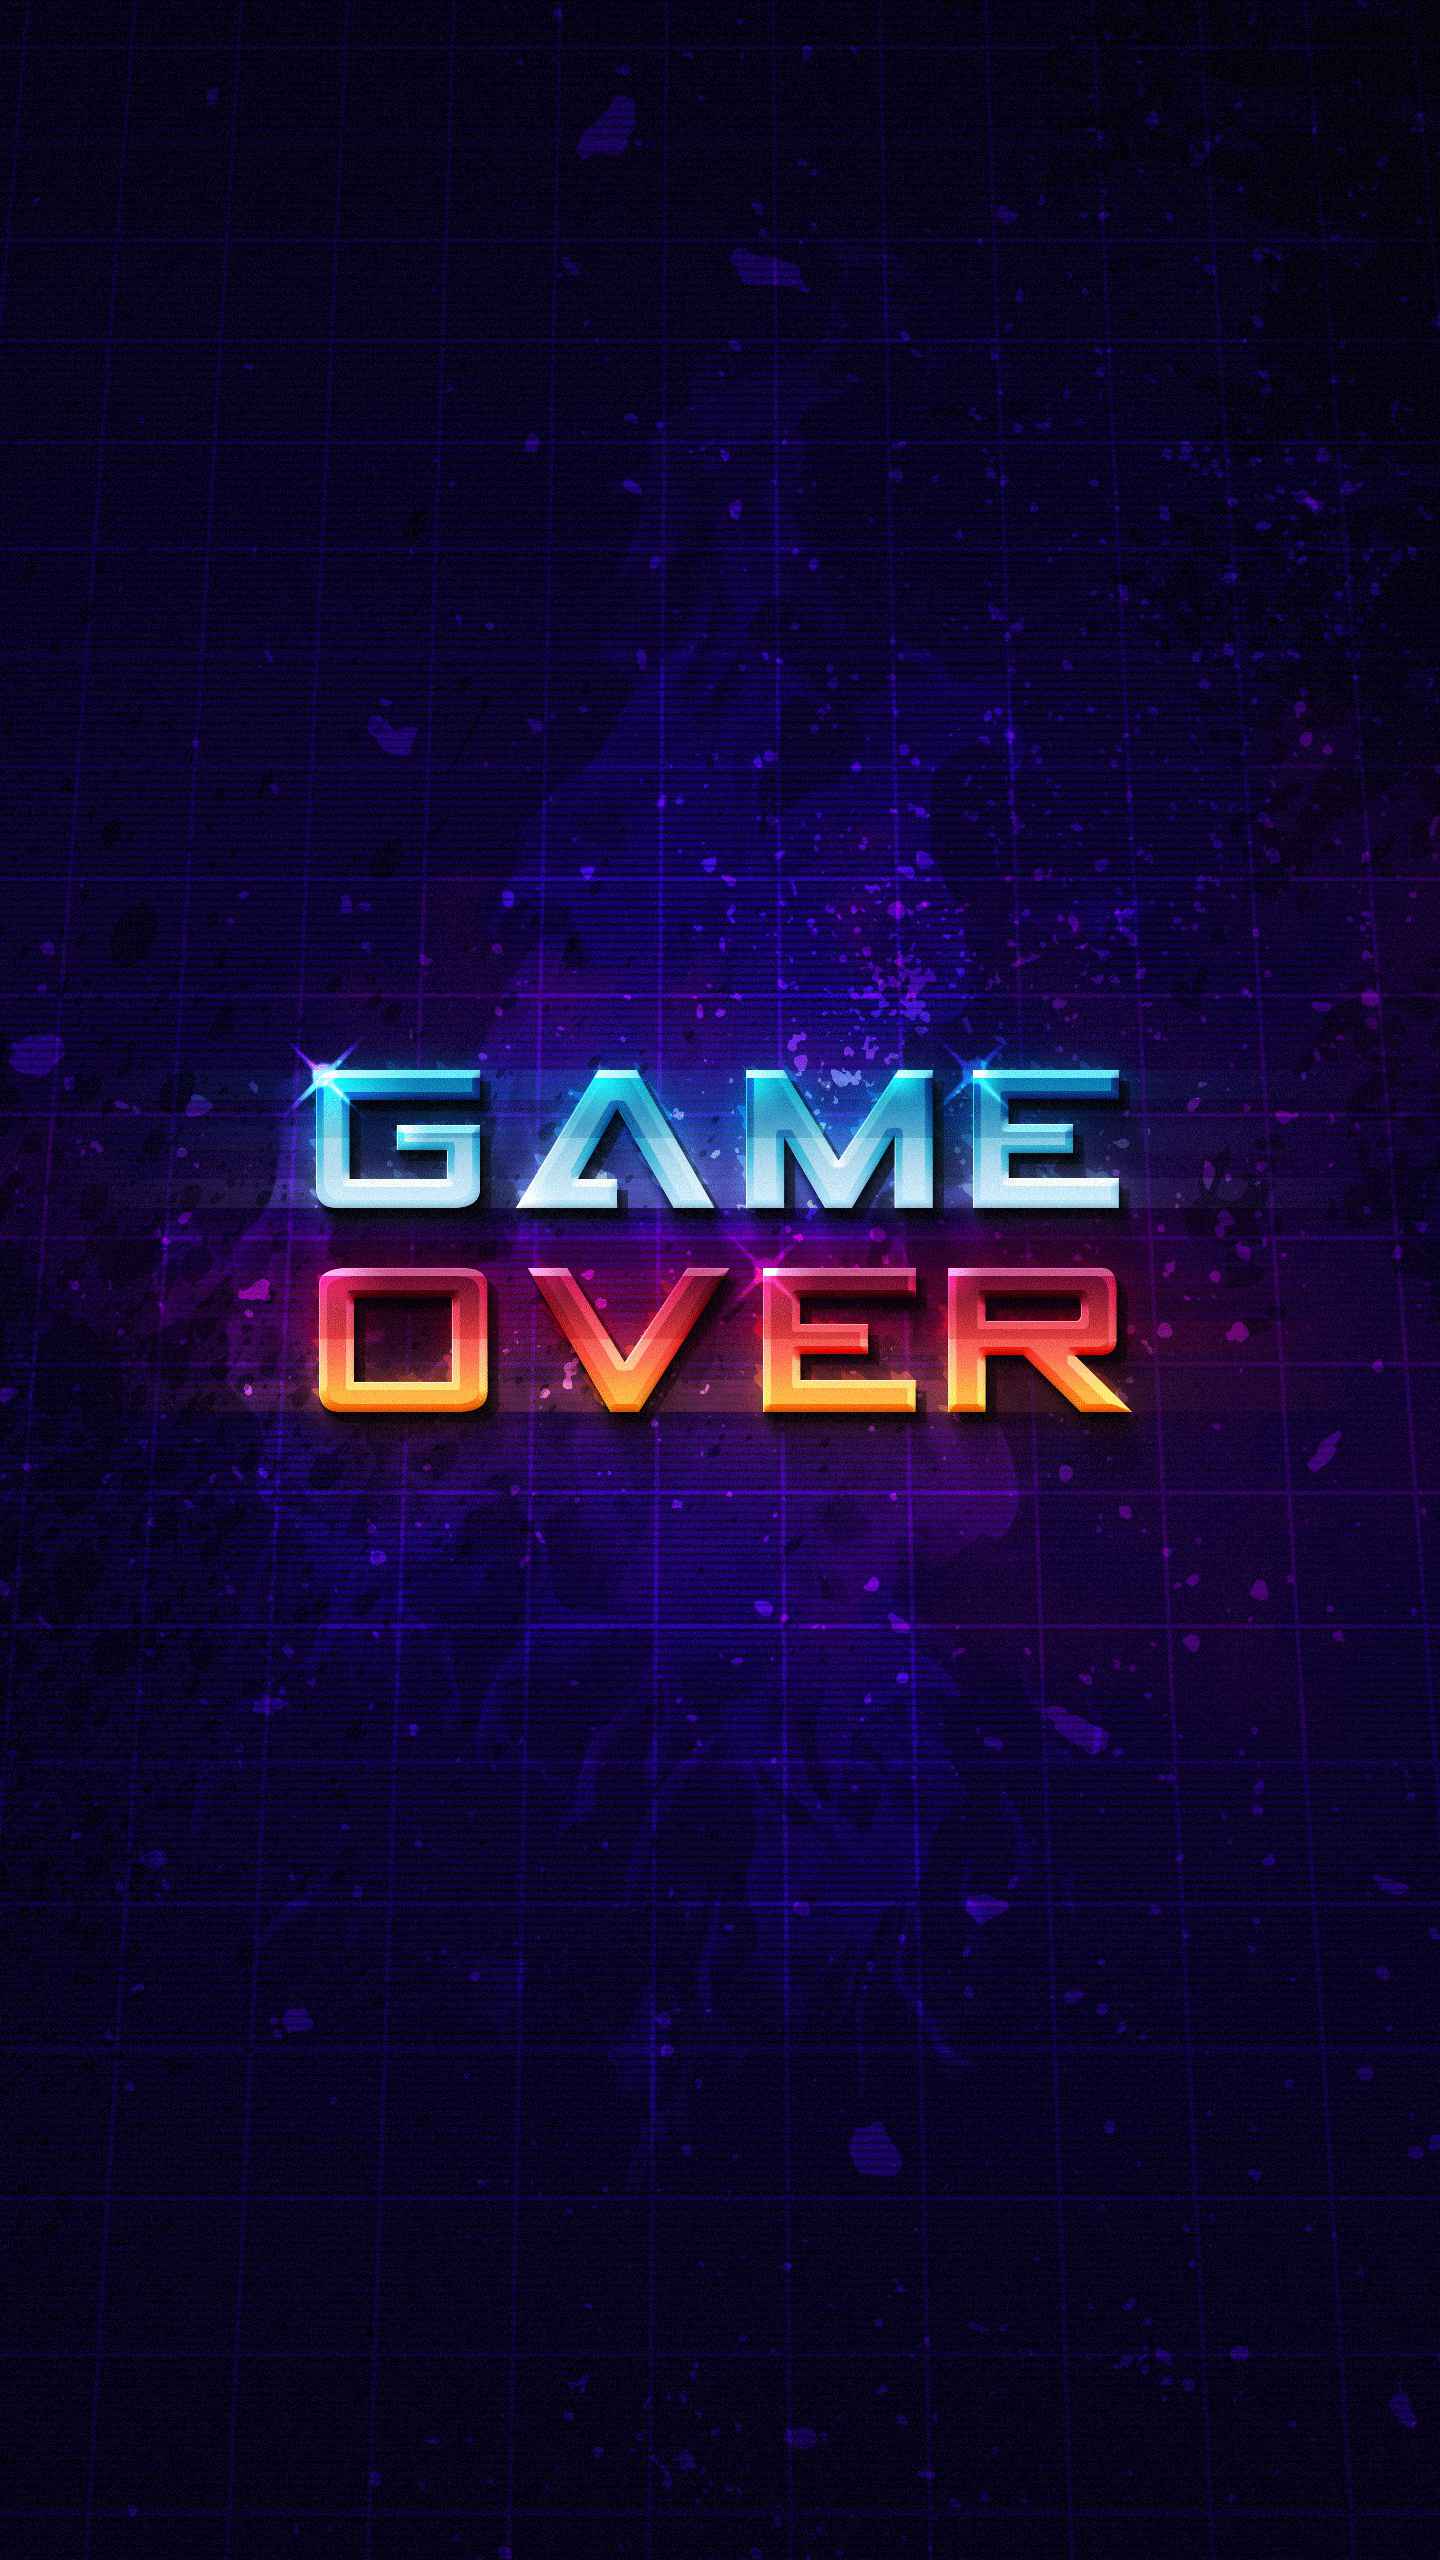 Game Over iPhone Wallpaper - iPhone Wallpapers : iPhone Wallpapers